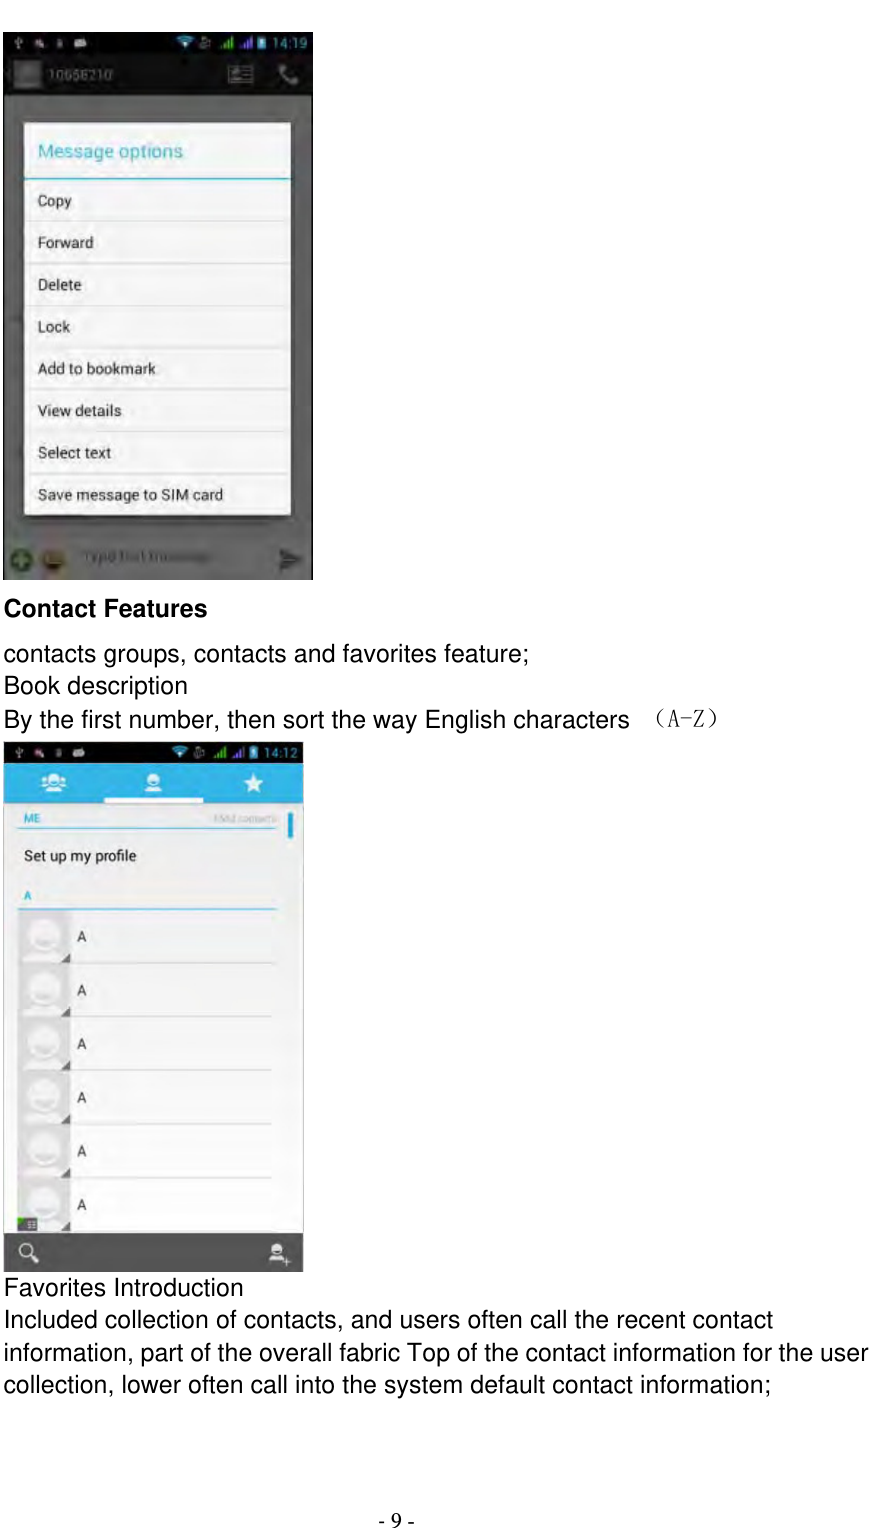                                          ‐ 9 -  Contact Features contacts groups, contacts and favorites feature; Book description By the first number, then sort the way English characters  （A-Z）  Favorites Introduction Included collection of contacts, and users often call the recent contact information, part of the overall fabric Top of the contact information for the user collection, lower often call into the system default contact information; 